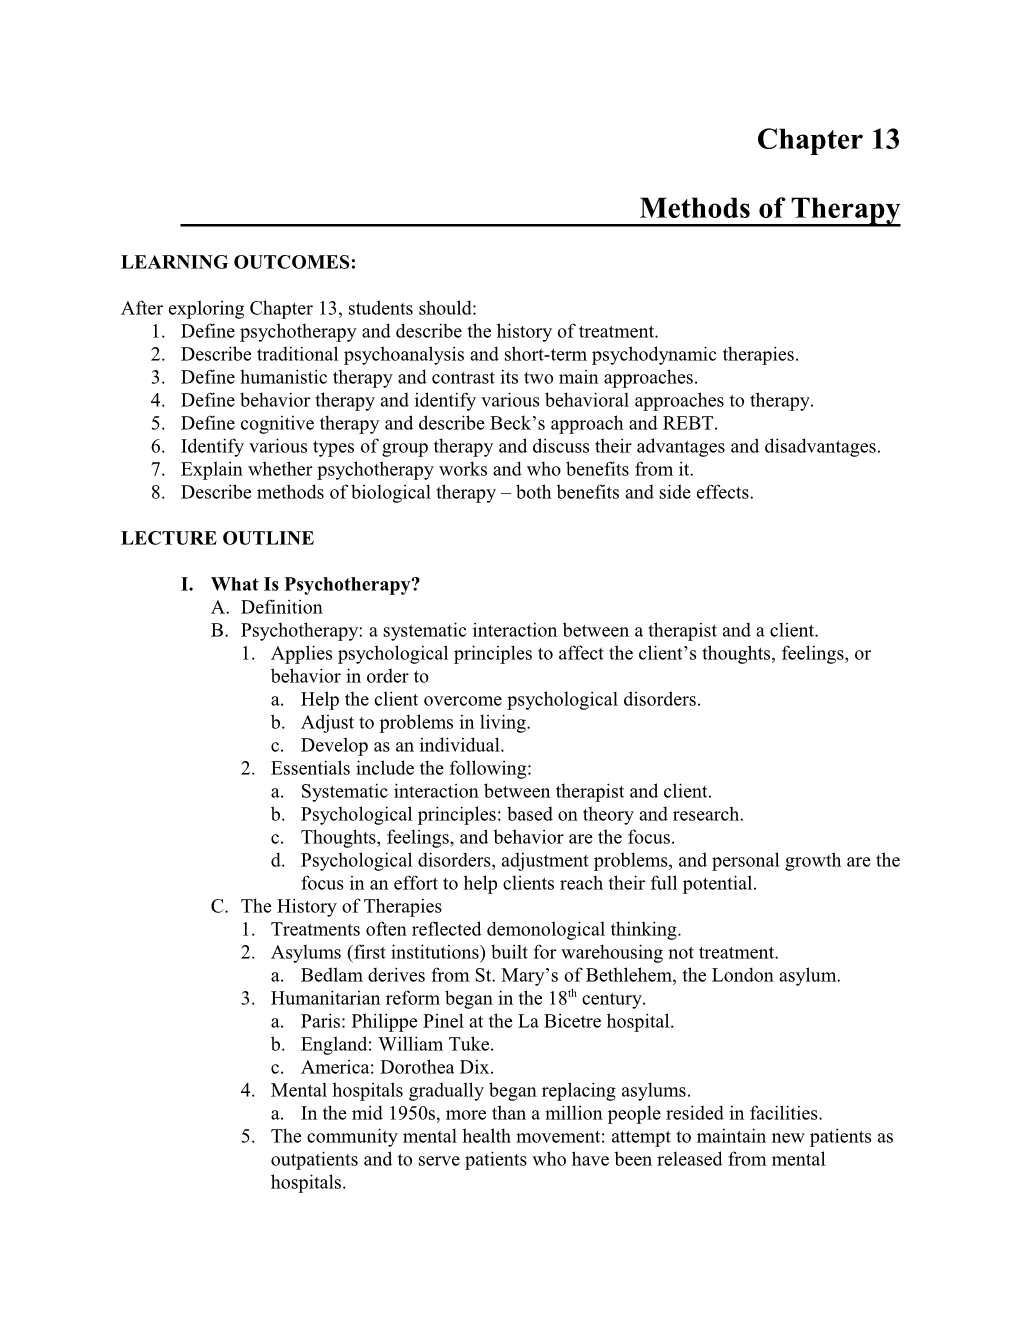 Chapter 13: Methods of Therapy Page 1